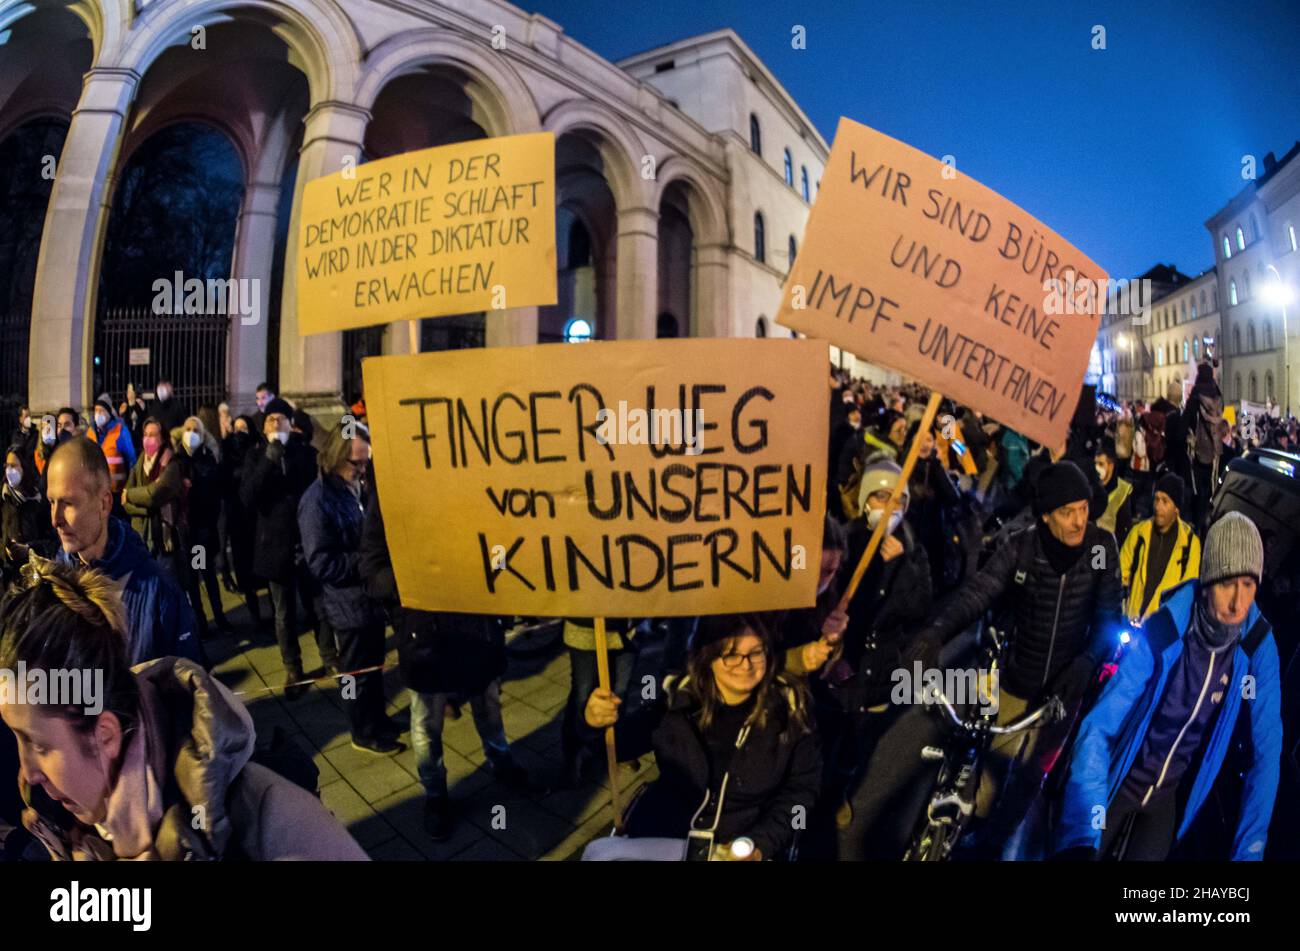 Munich, Bavaria, Germany. 15th Dec, 2021. Up to 3,500 Corona rebels, anti-vaxxers, conspiracy theorists, Reichsbuerger, neonazis, and Corona deniers assembled on Munich's Ludwigstrasse for a demonstration against a non-existent compulsory vaccination law, vaccines in general, masks and the pandemic control laws in place. Masking was extremely variable, while a large number of the masked were wearing them improperly. Distancing was nearly non-existent and there appeared to be few to no controls in place. Passersby remarked sarcastically about how the people inside 'must all have docto Stock Photo